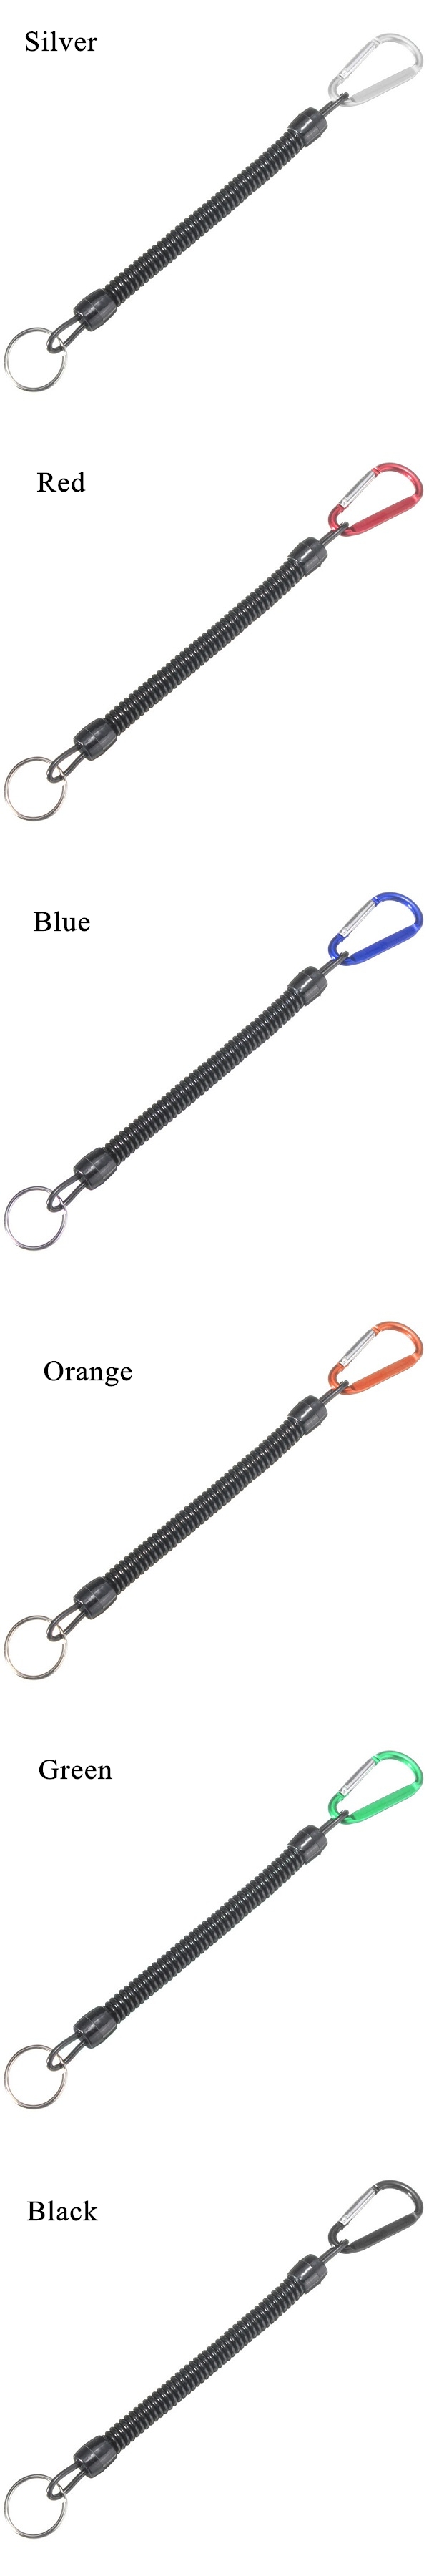 Fishing-Lanyards-Boating-Multicolor-Fishing-Ropes--Secure-Pliers-Lip-Grips-Tackle-Fishing-Tool-1027826